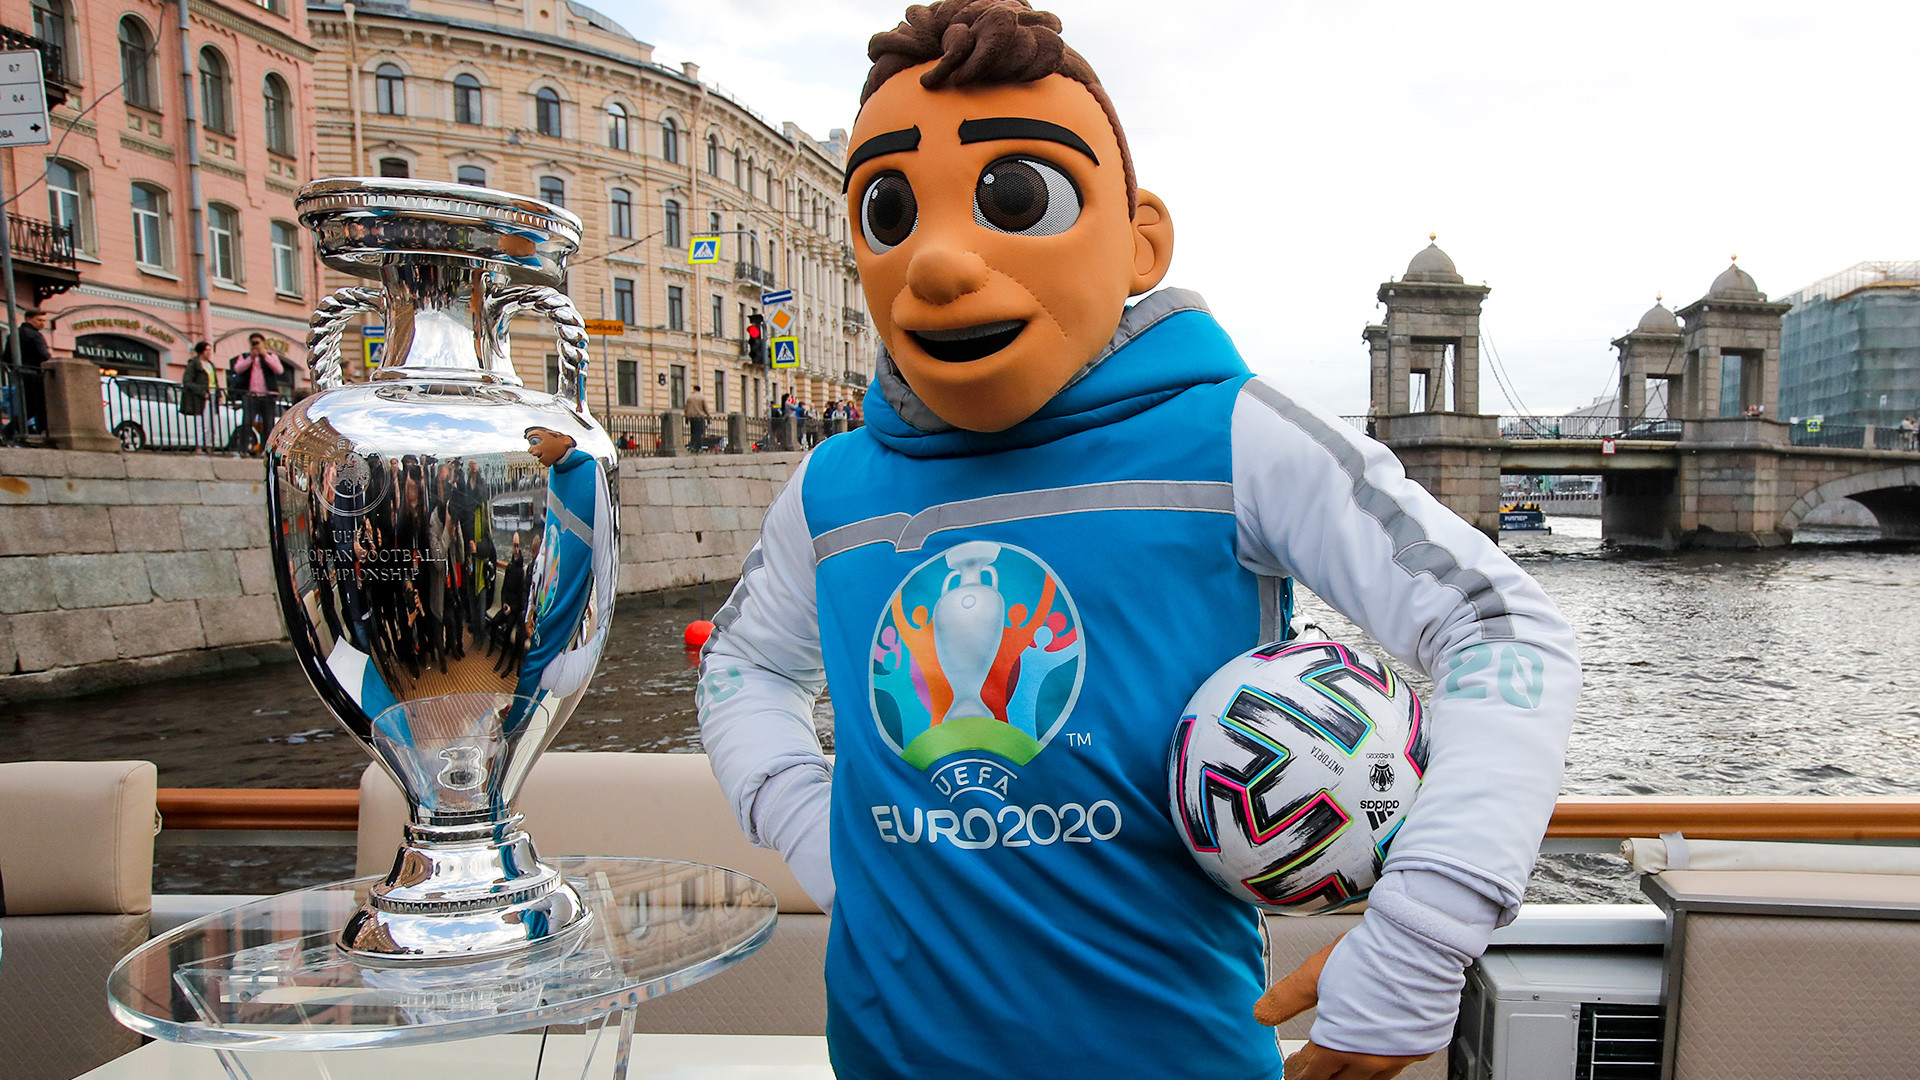 EURO 2020 championship mascot Skillzy poses with the EURO 2020 trophy traveling on a boat down the Fontanka River during the official EURO 2020 trophy's tour in St.Petersburg, Russia, Saturday, May 22, 2021. St. Petersburg will host seven postponed UEFA EURO 2020 matches, including a quarter final.